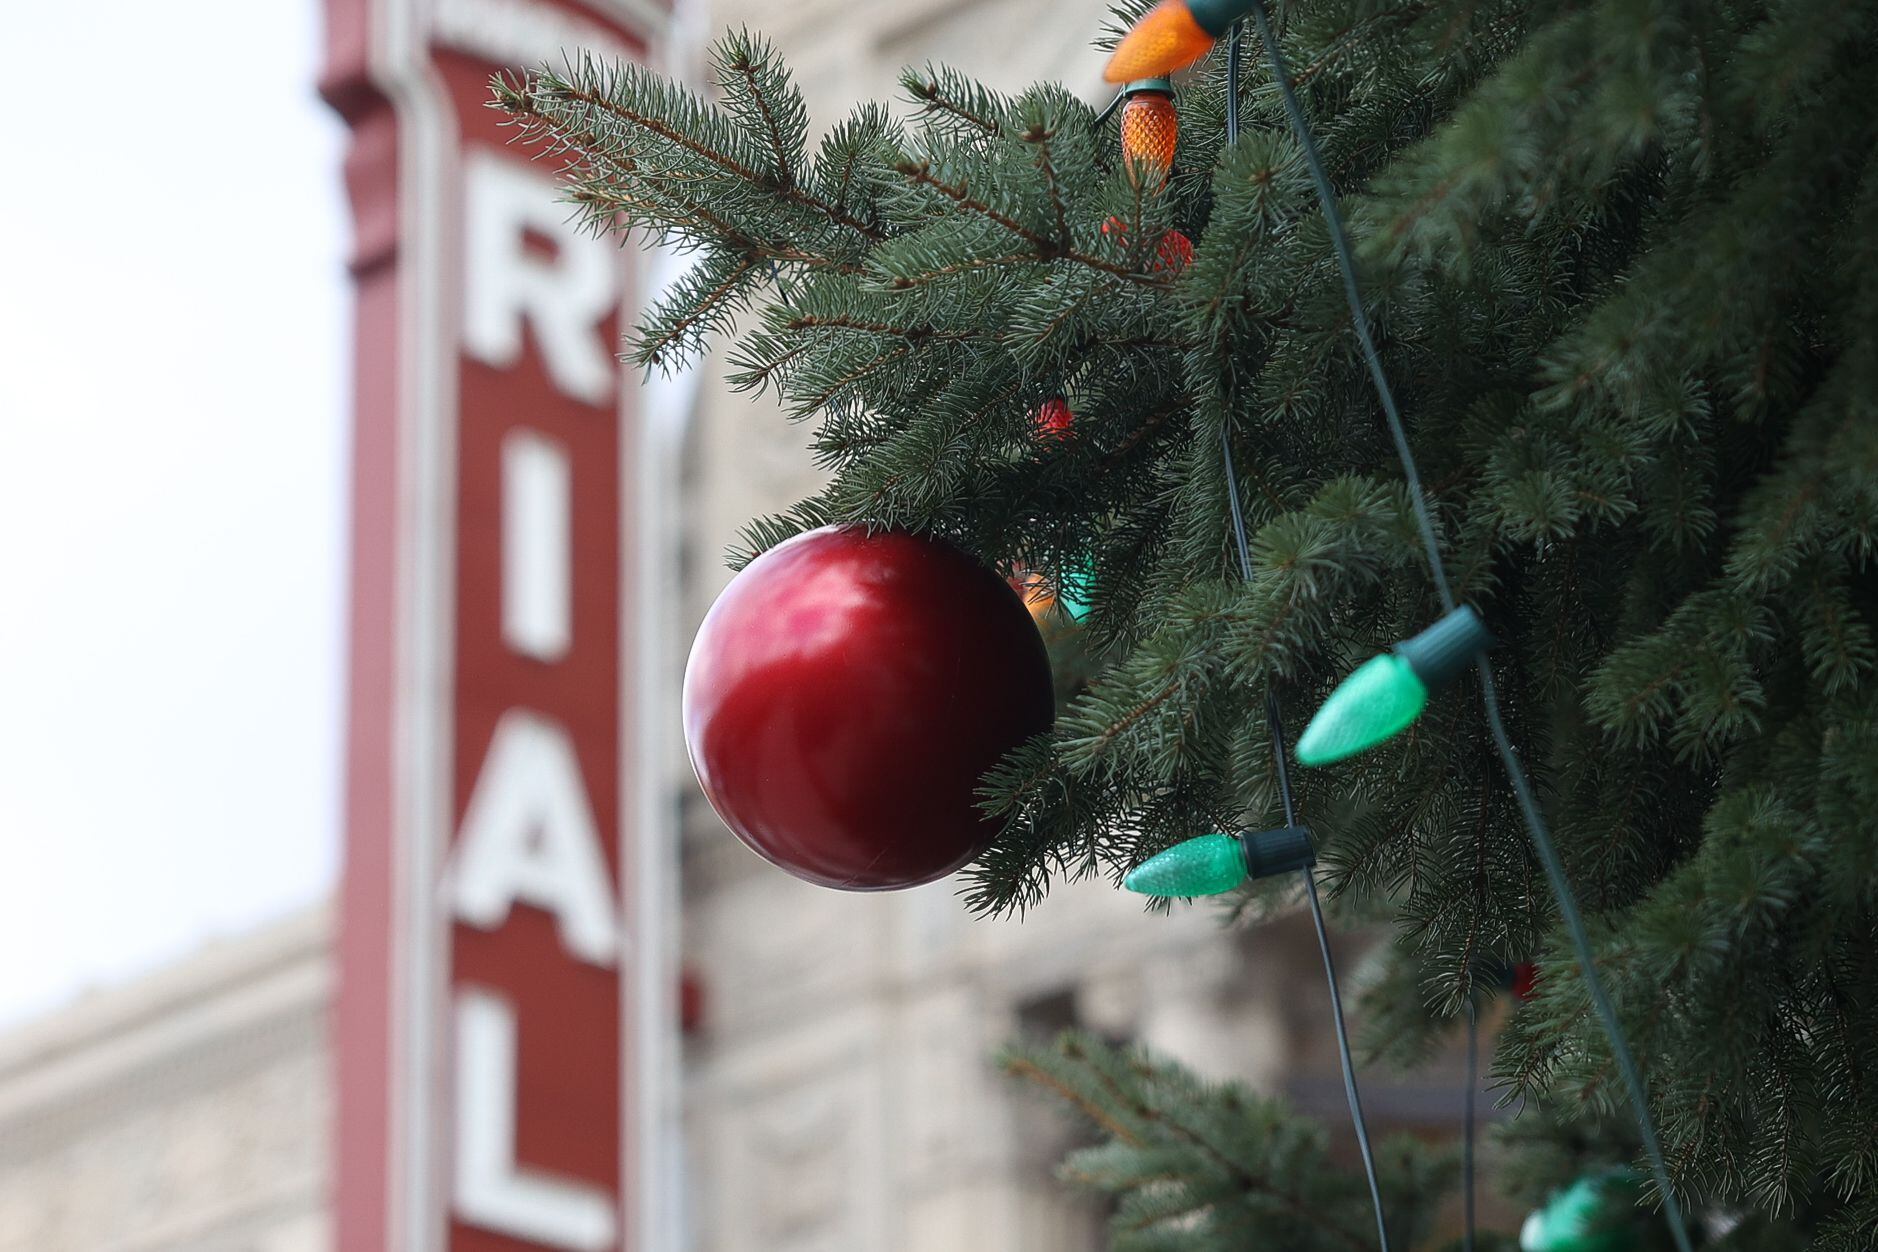 The Joliet Christmas is decorated and ready for the official lighting on Friday.